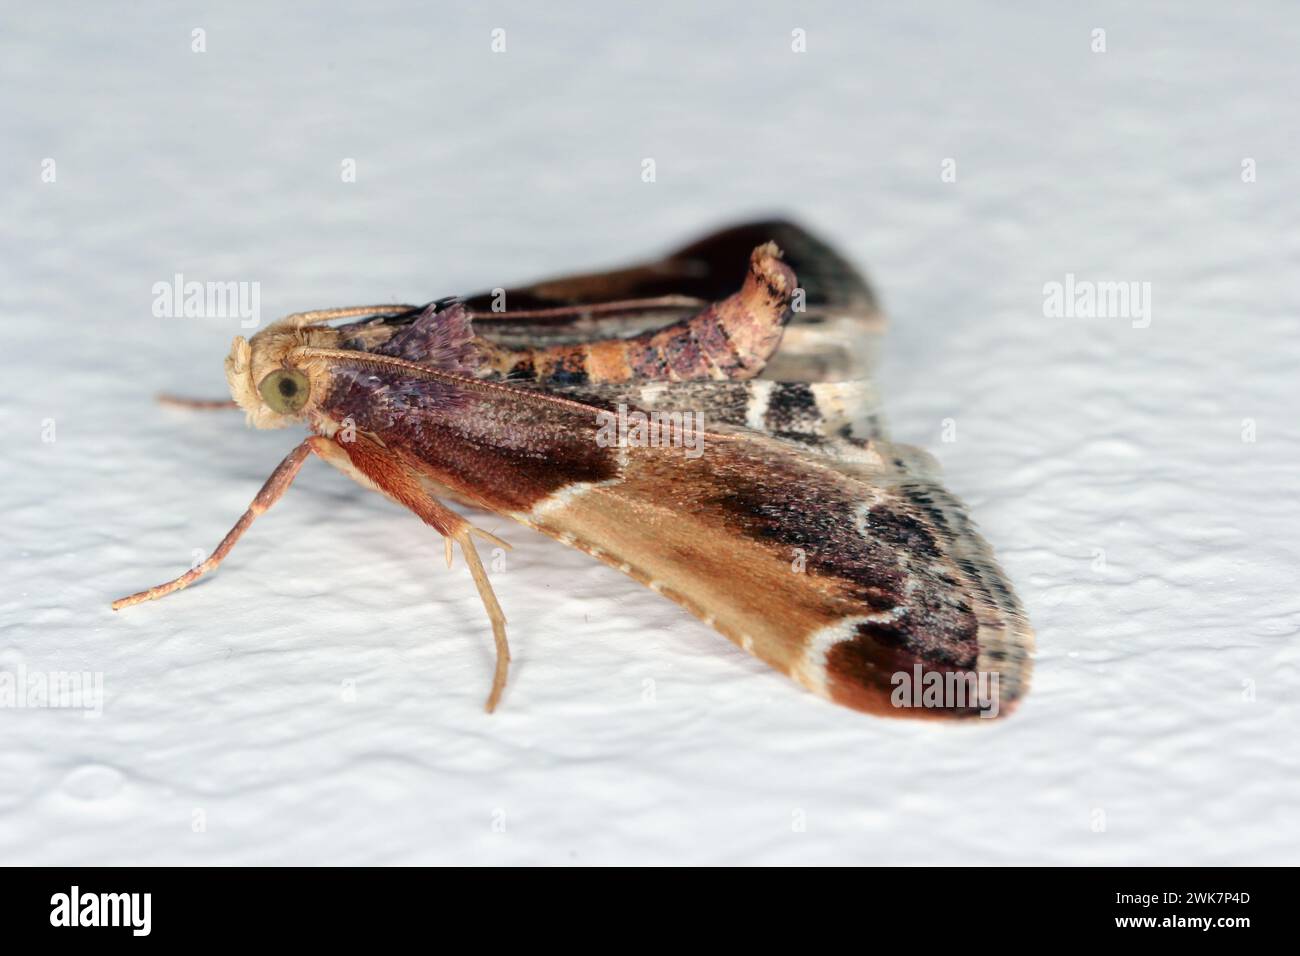 The meal moth or meal snout moth (Pyralis farinalis) a cosmopolitan moth of the family Pyralidae. Caterpillars are pests of stored foods. Stock Photo